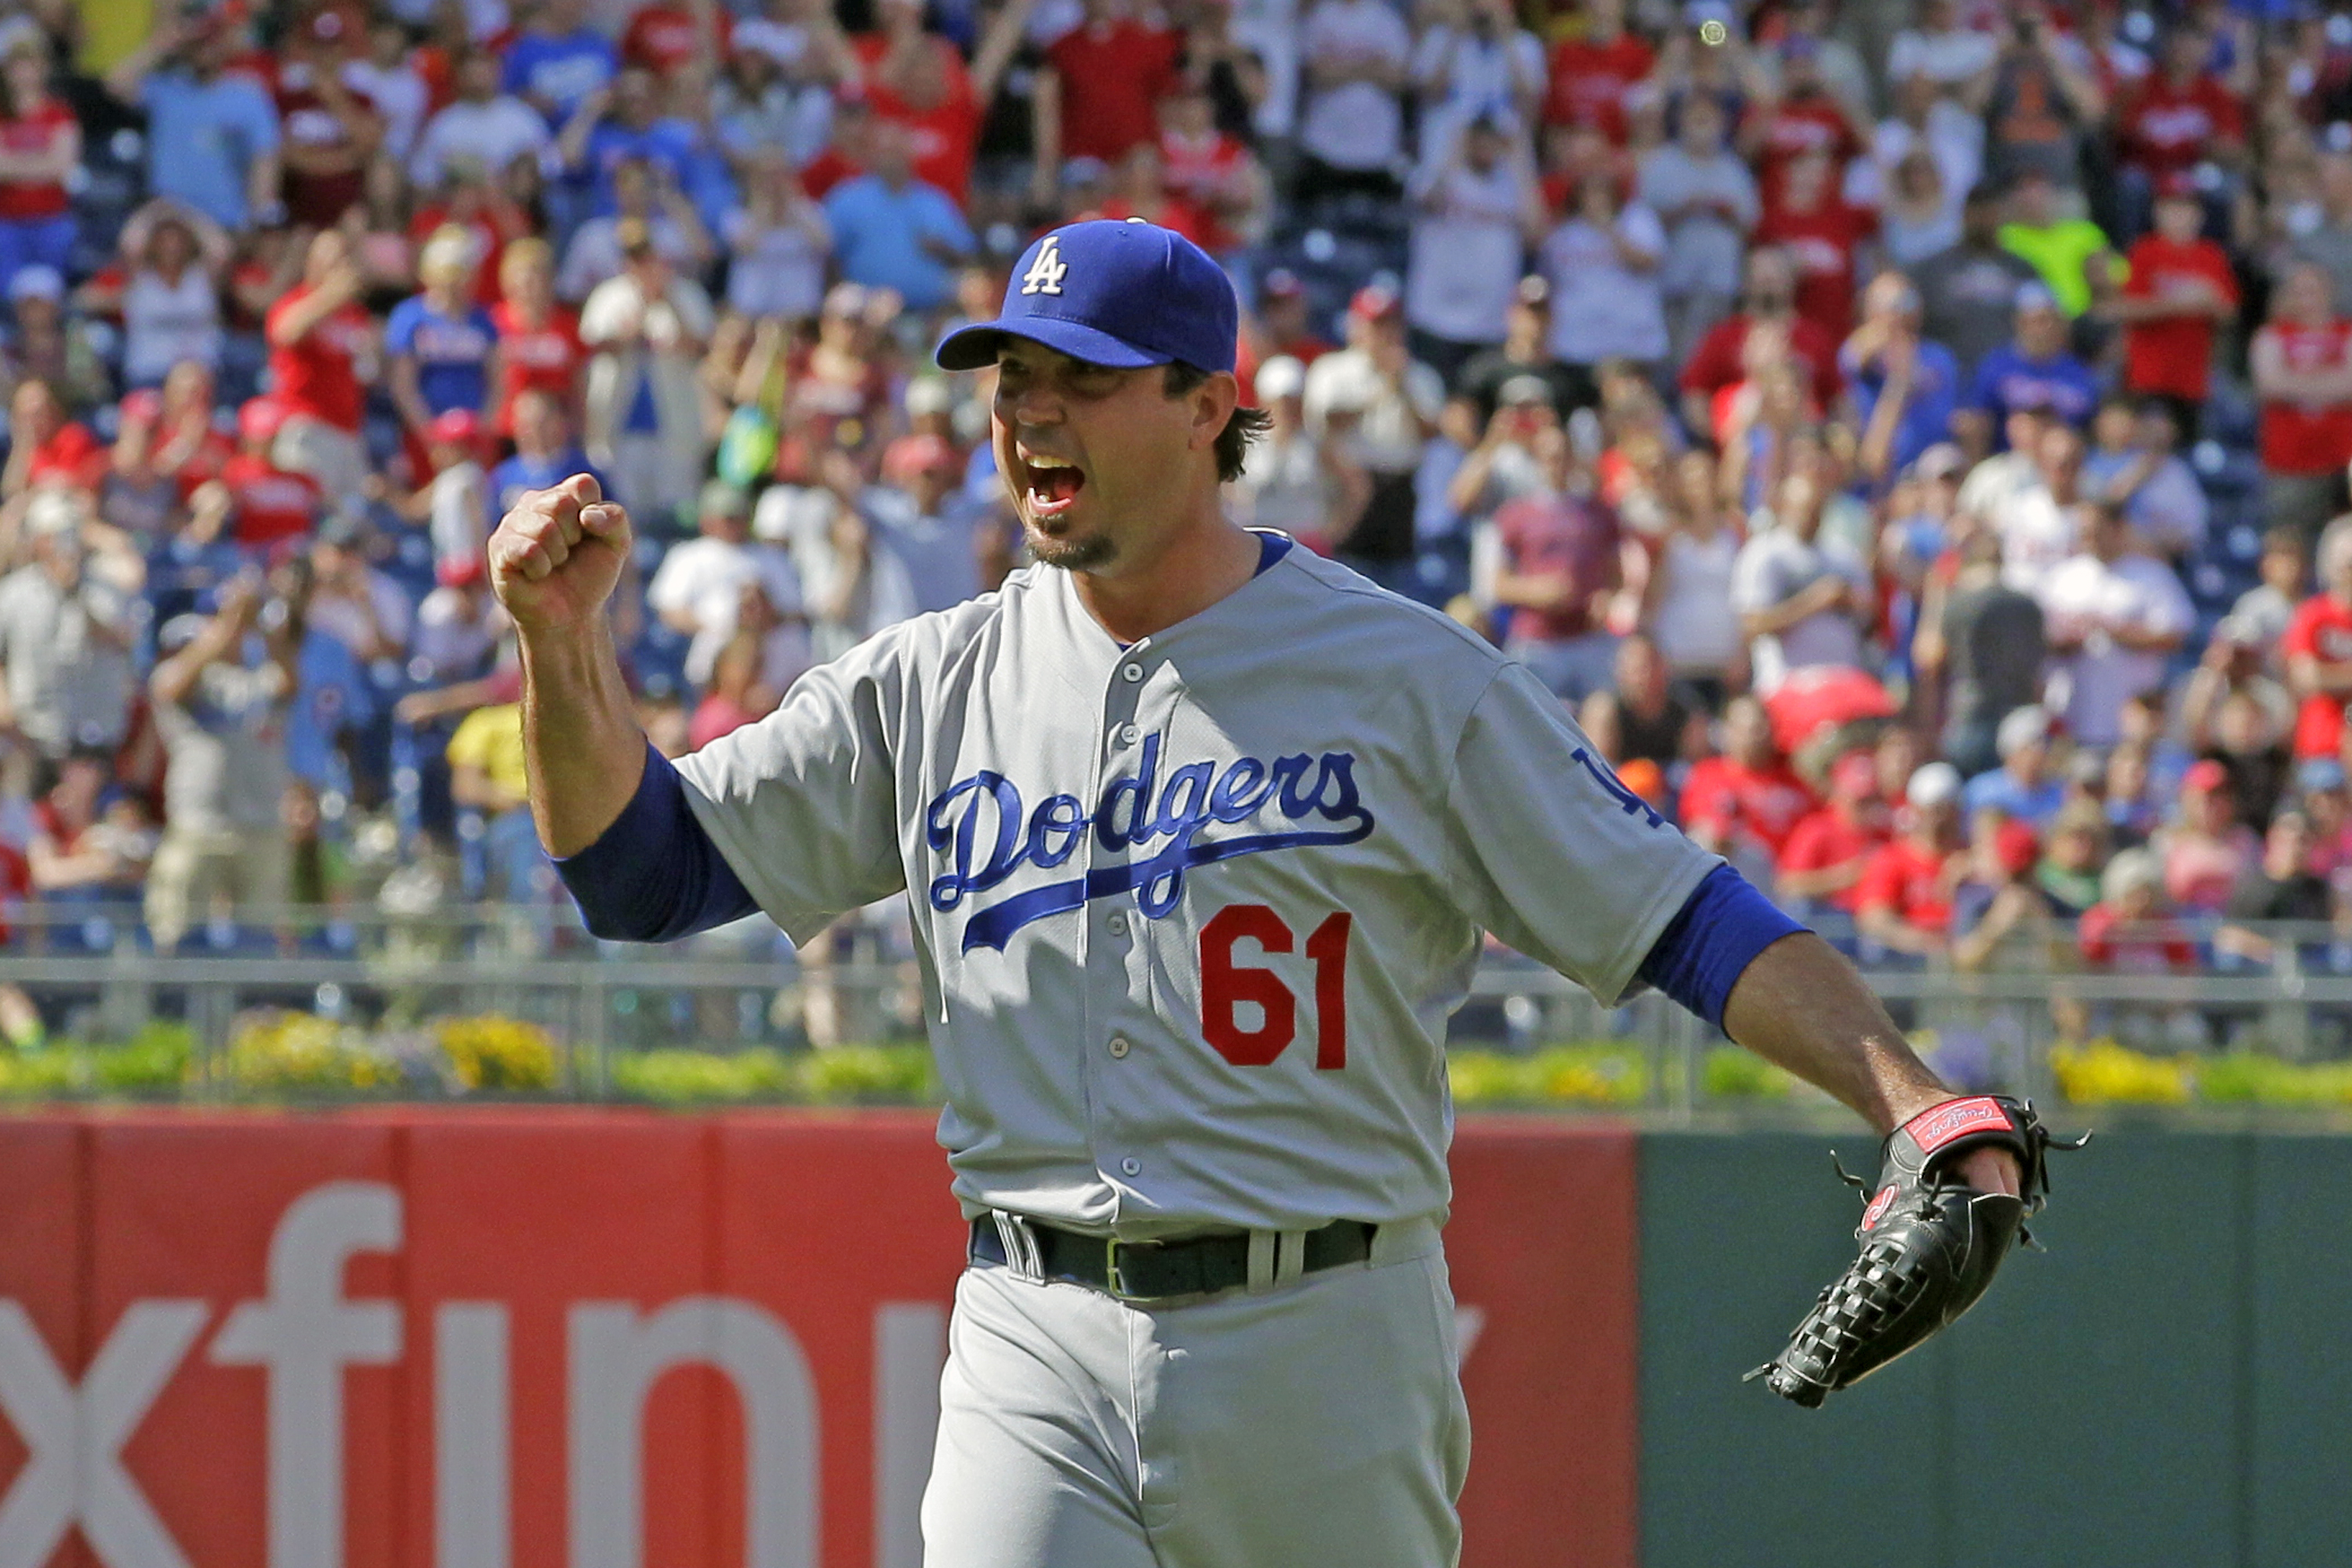 Josh Beckett of the Los Angeles Dodgers celebrates in the ninth inning after recording a no hitter during a game against the Philadelphia Phillies at Citizens Bank Park on May 25, 2014 in Philadelphia, Pennsylvania. (Hunter Martin—Getty Images)